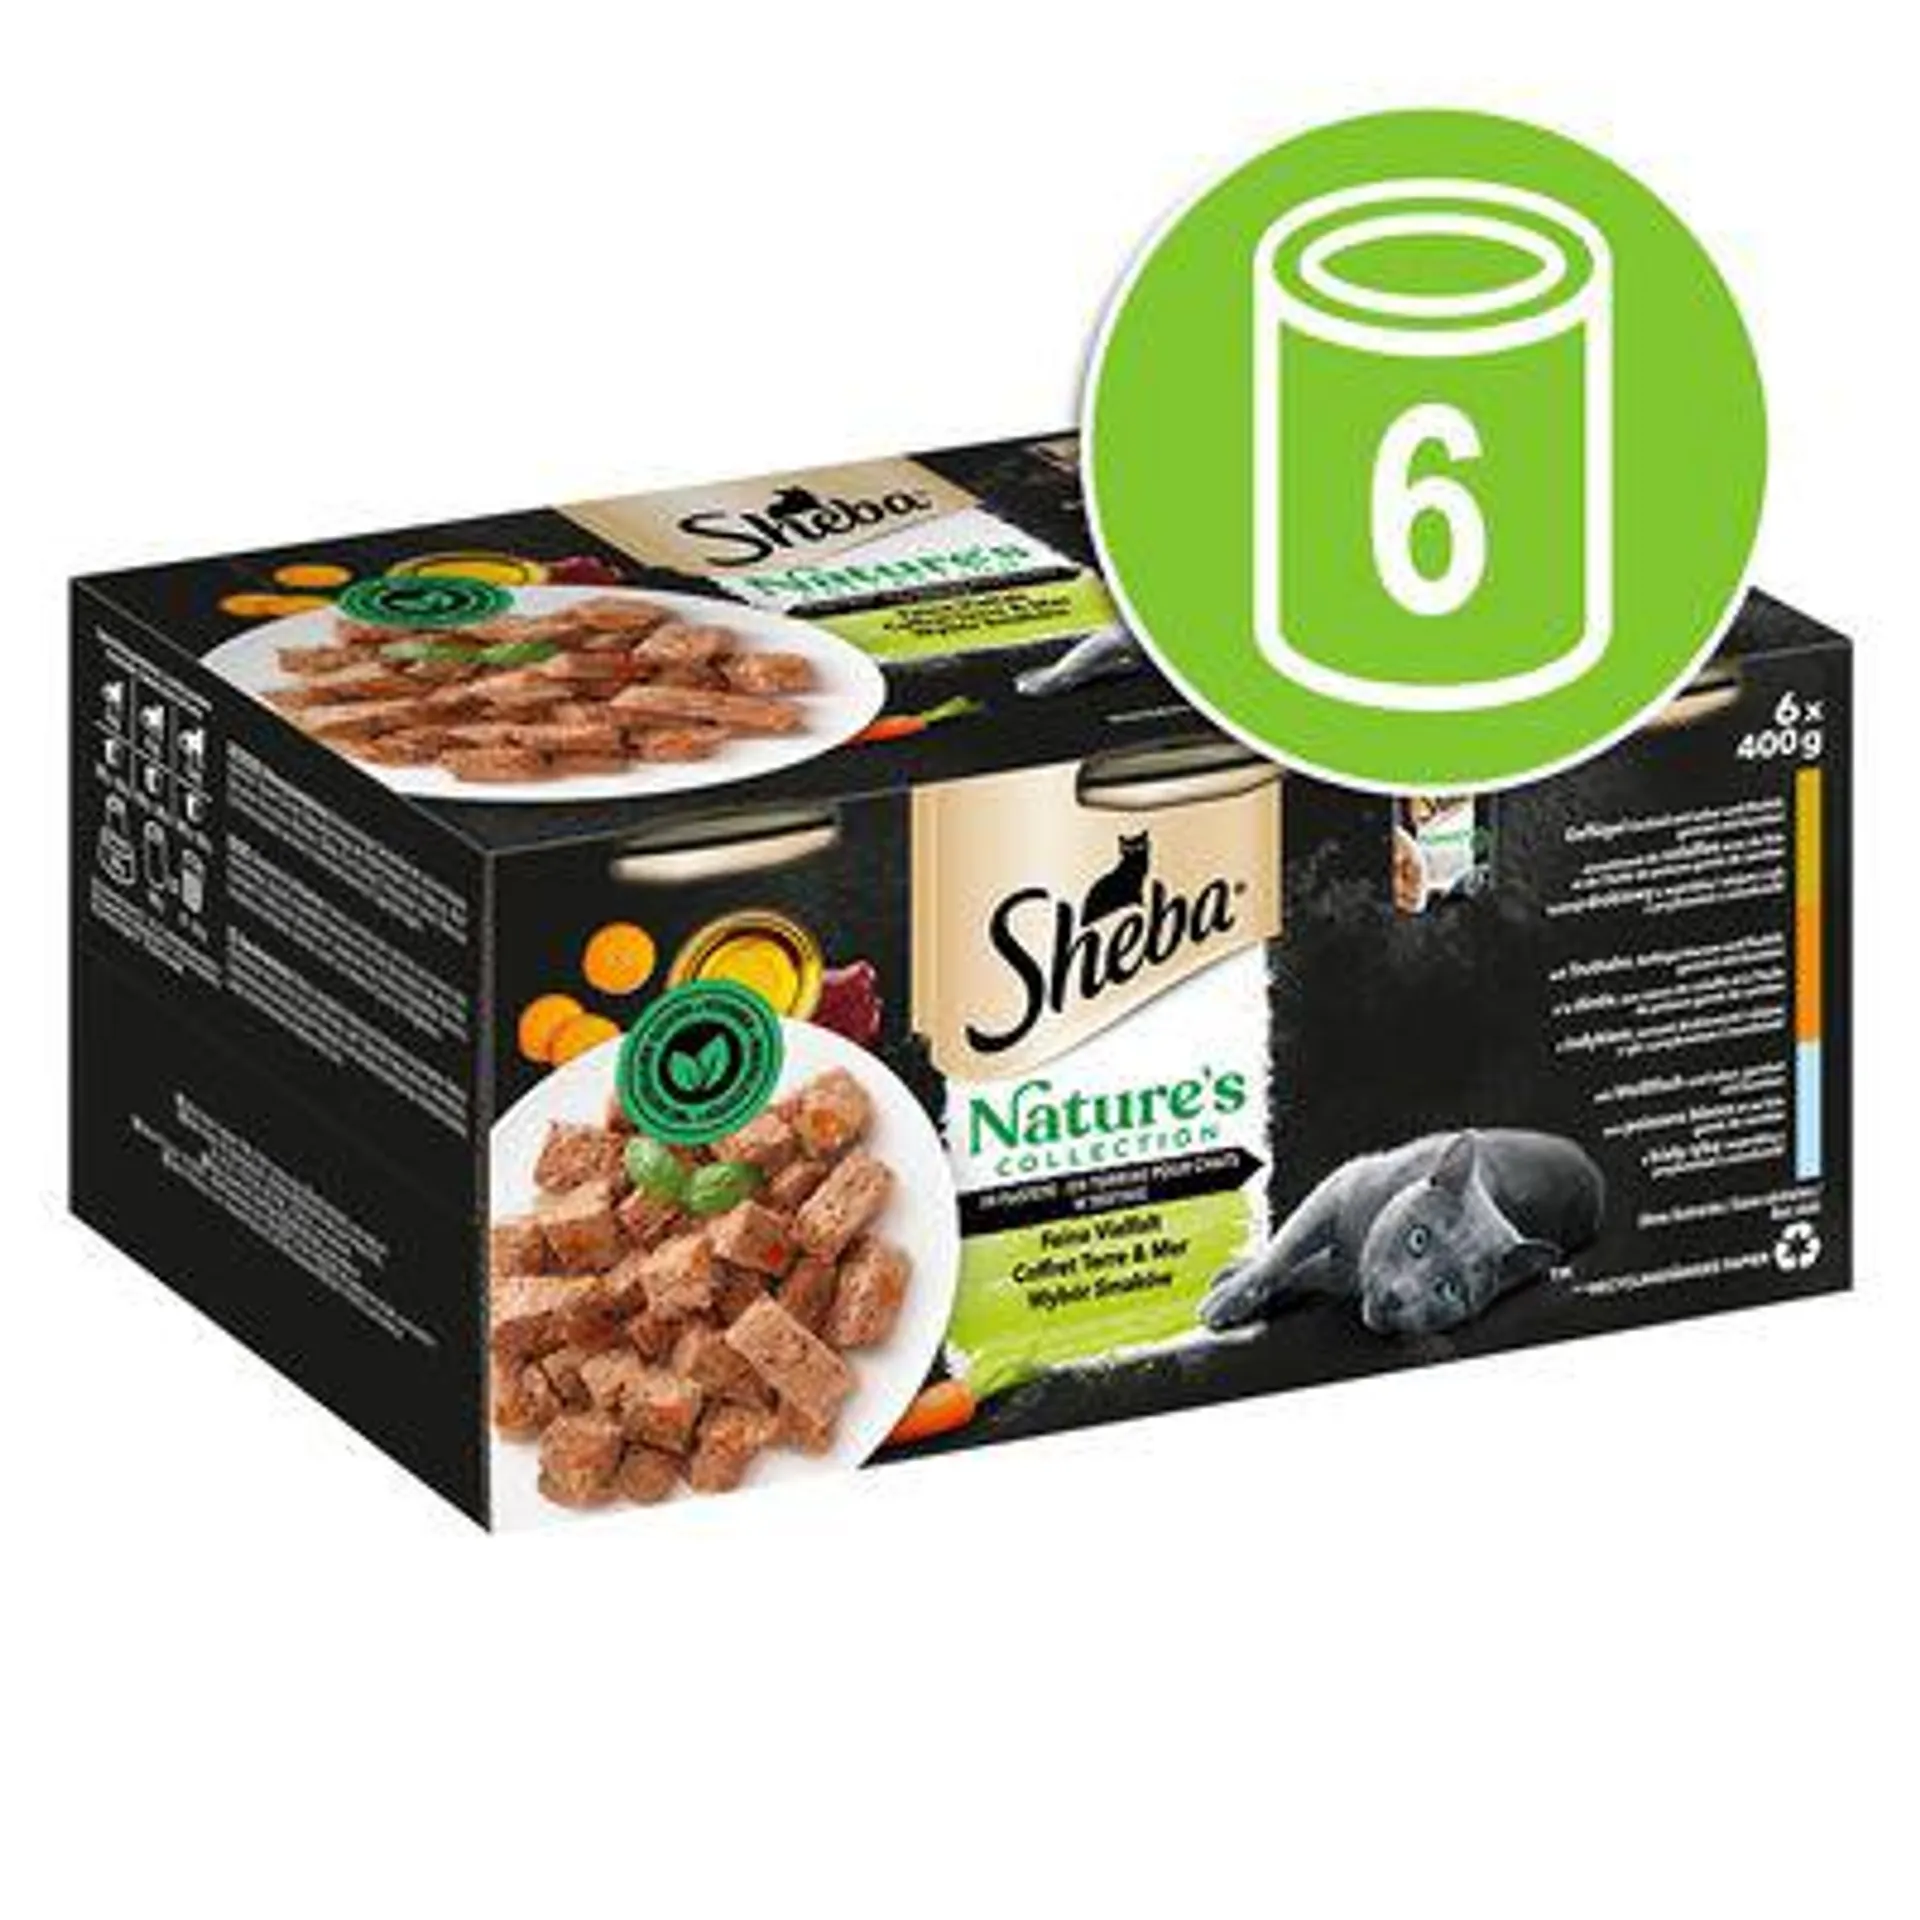 Sheba Nature's Collection 6 x 400 g - Pack misto